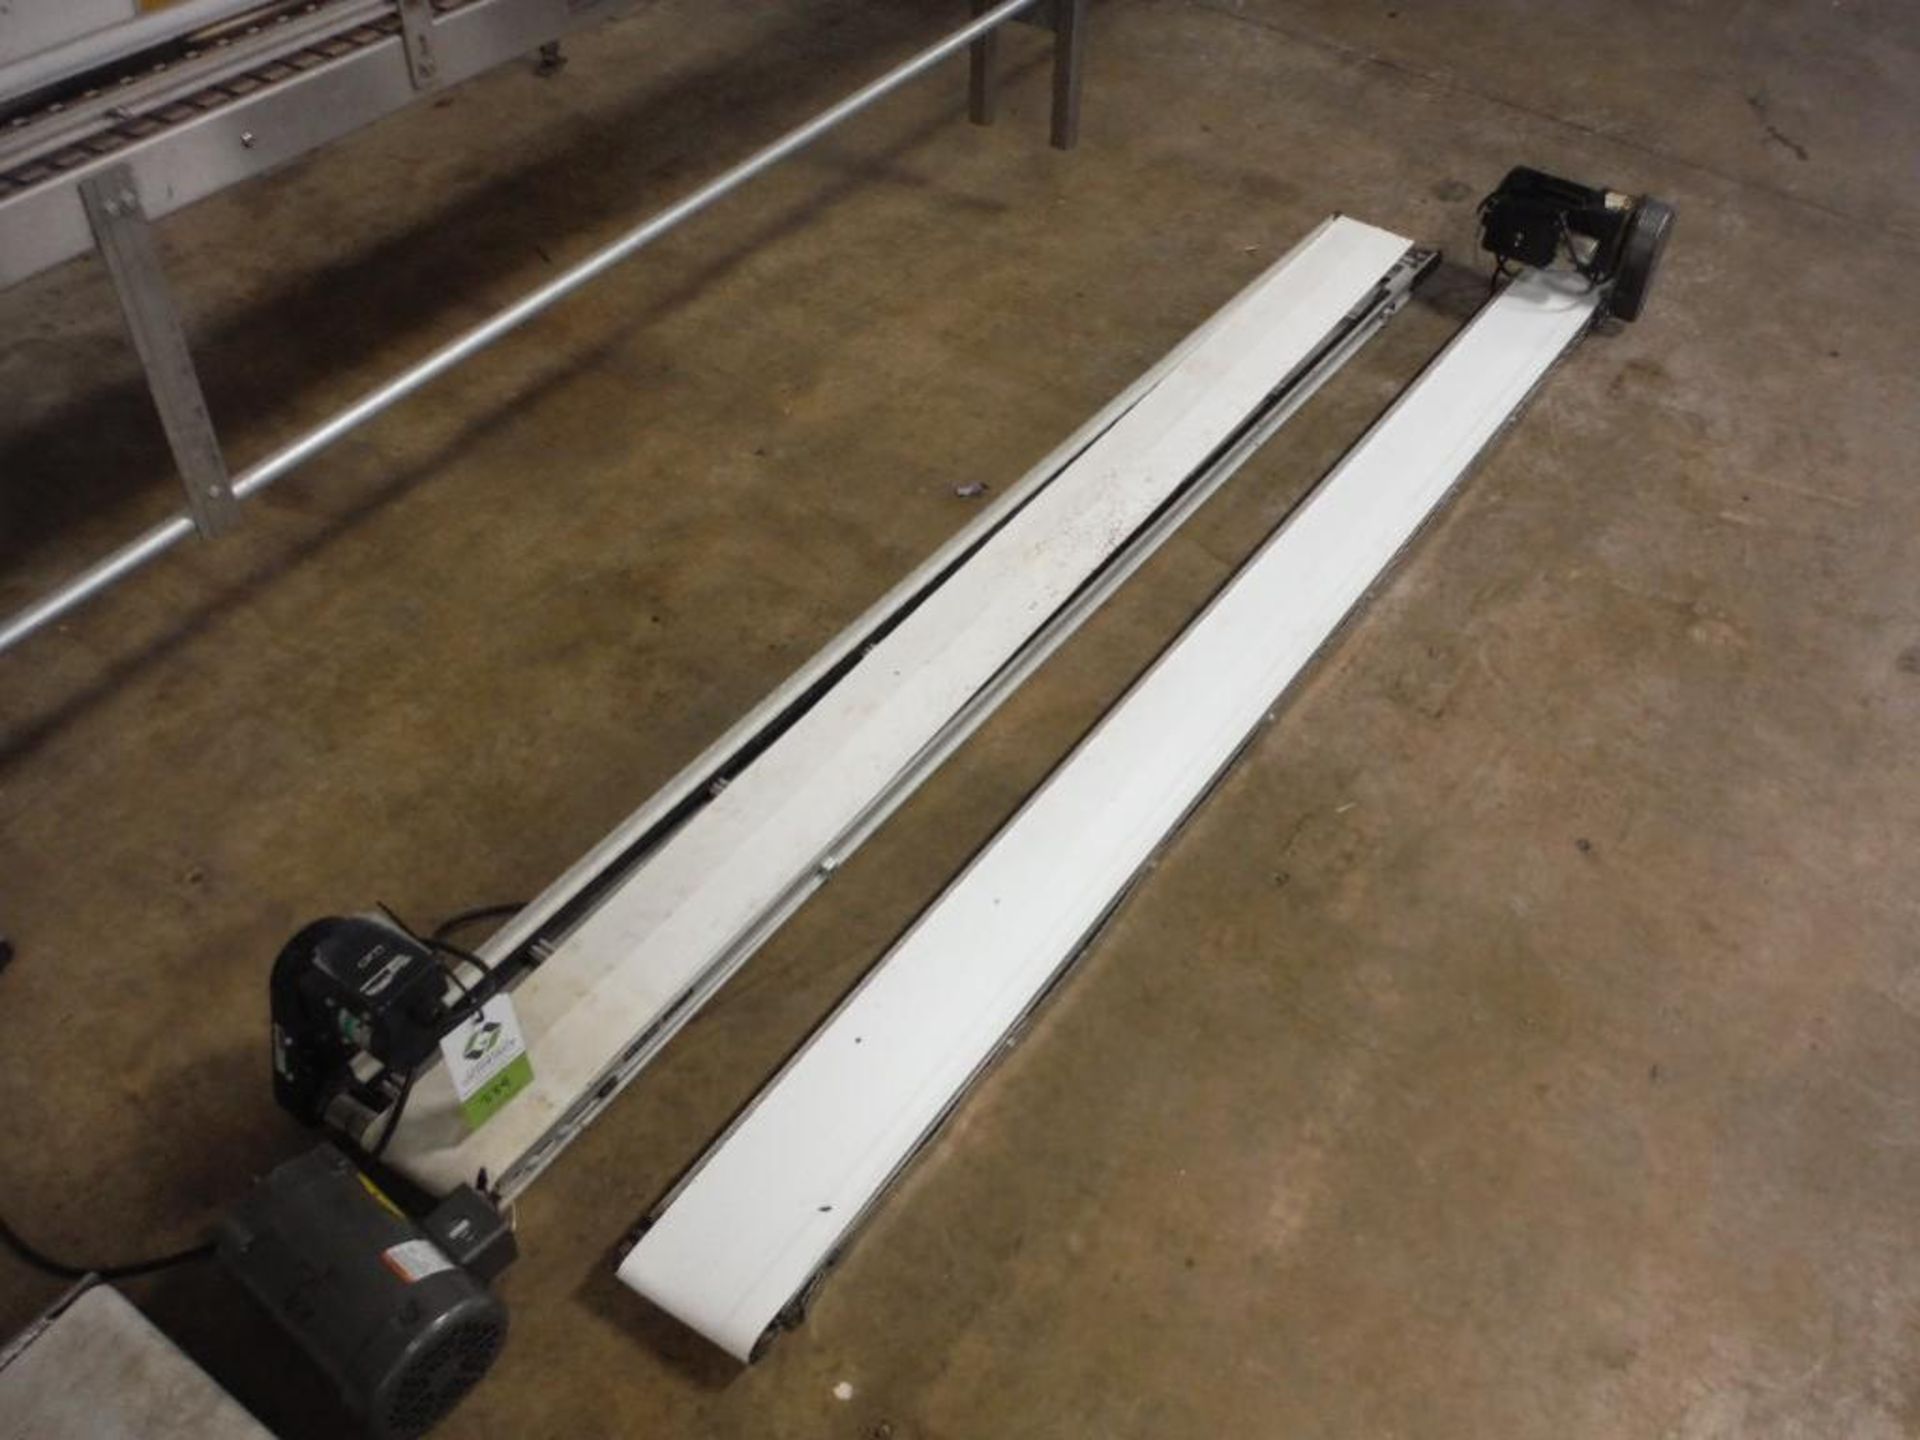 (2) belt conveyors, 96 in. long x 5 in. wide, aluminum bed, with drives, (1) belt conveyor 20 in. lo - Image 4 of 7